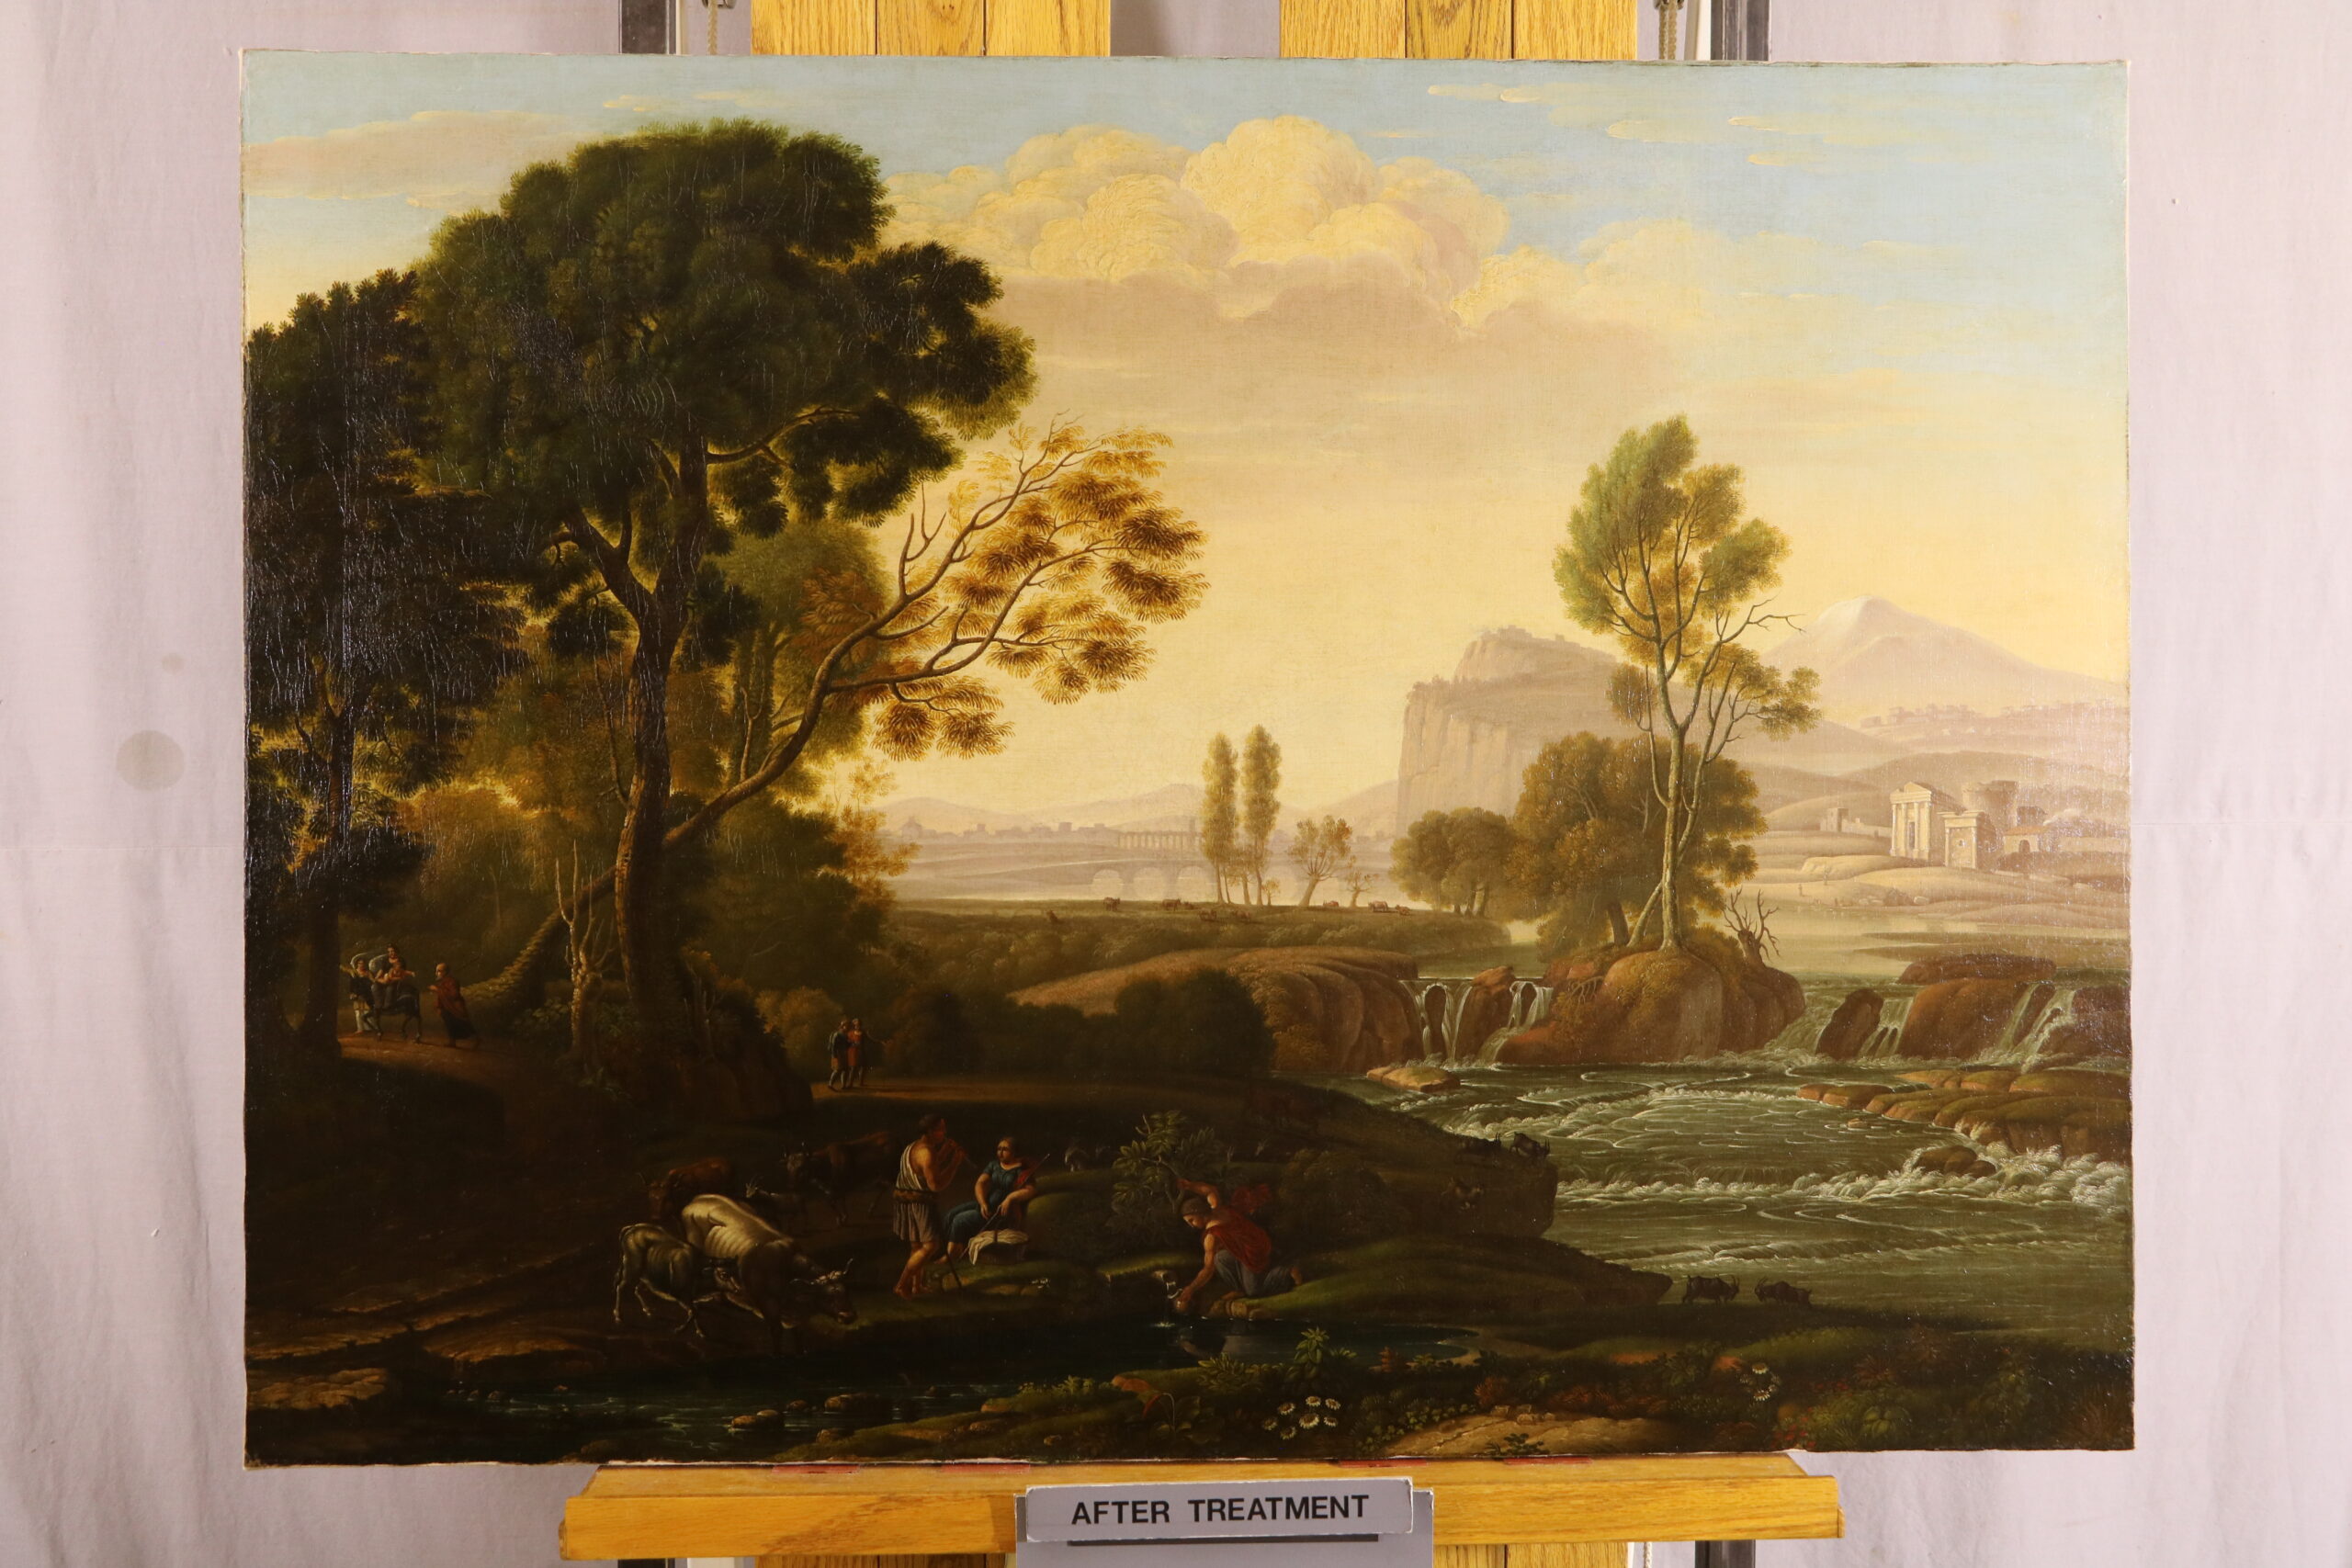 A painting on a easel. The painting is of Egypt and has trees